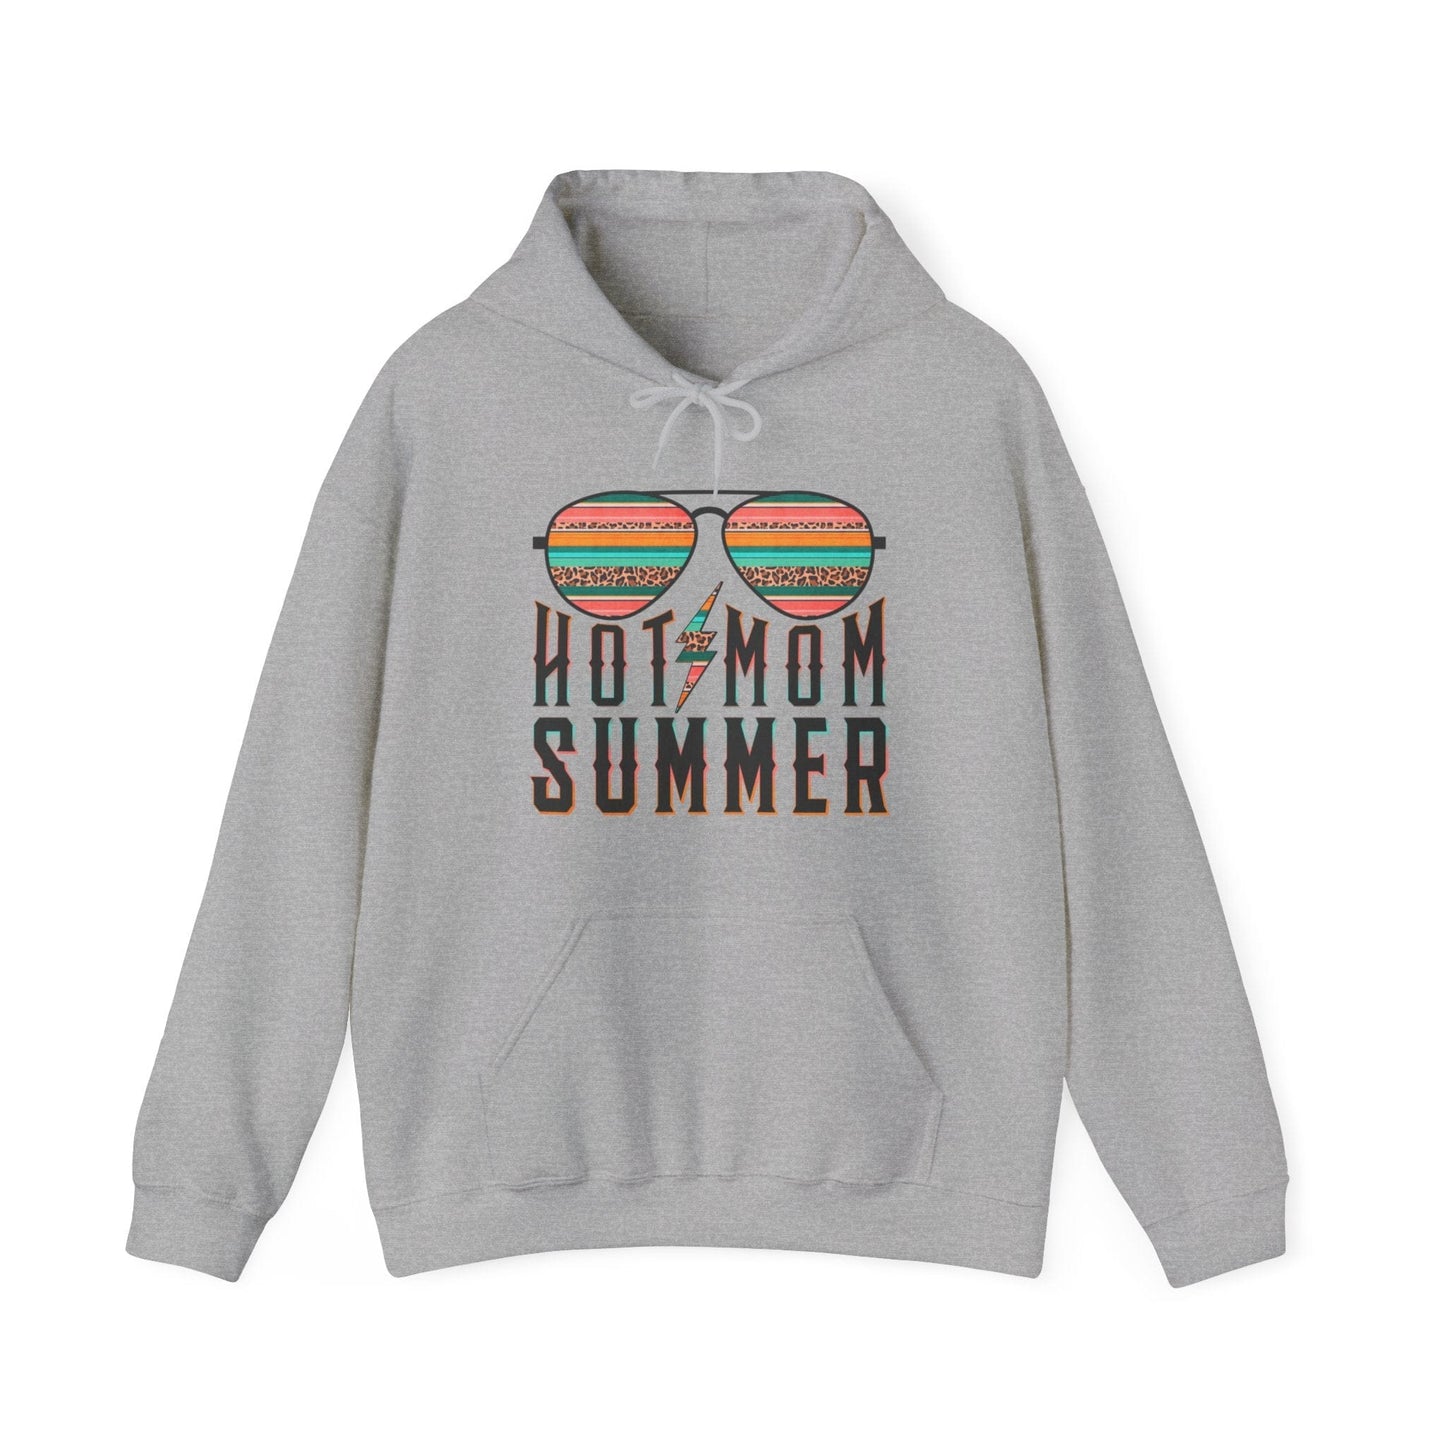 Snuggle up with the ‘Hot Mom Summer’ retro hooded sweatshirt featuring a sunglasses and thunderbolt, the ideal blend of comfort and empowerment for Mother's Day – exclusively at D1gital Emporium US.